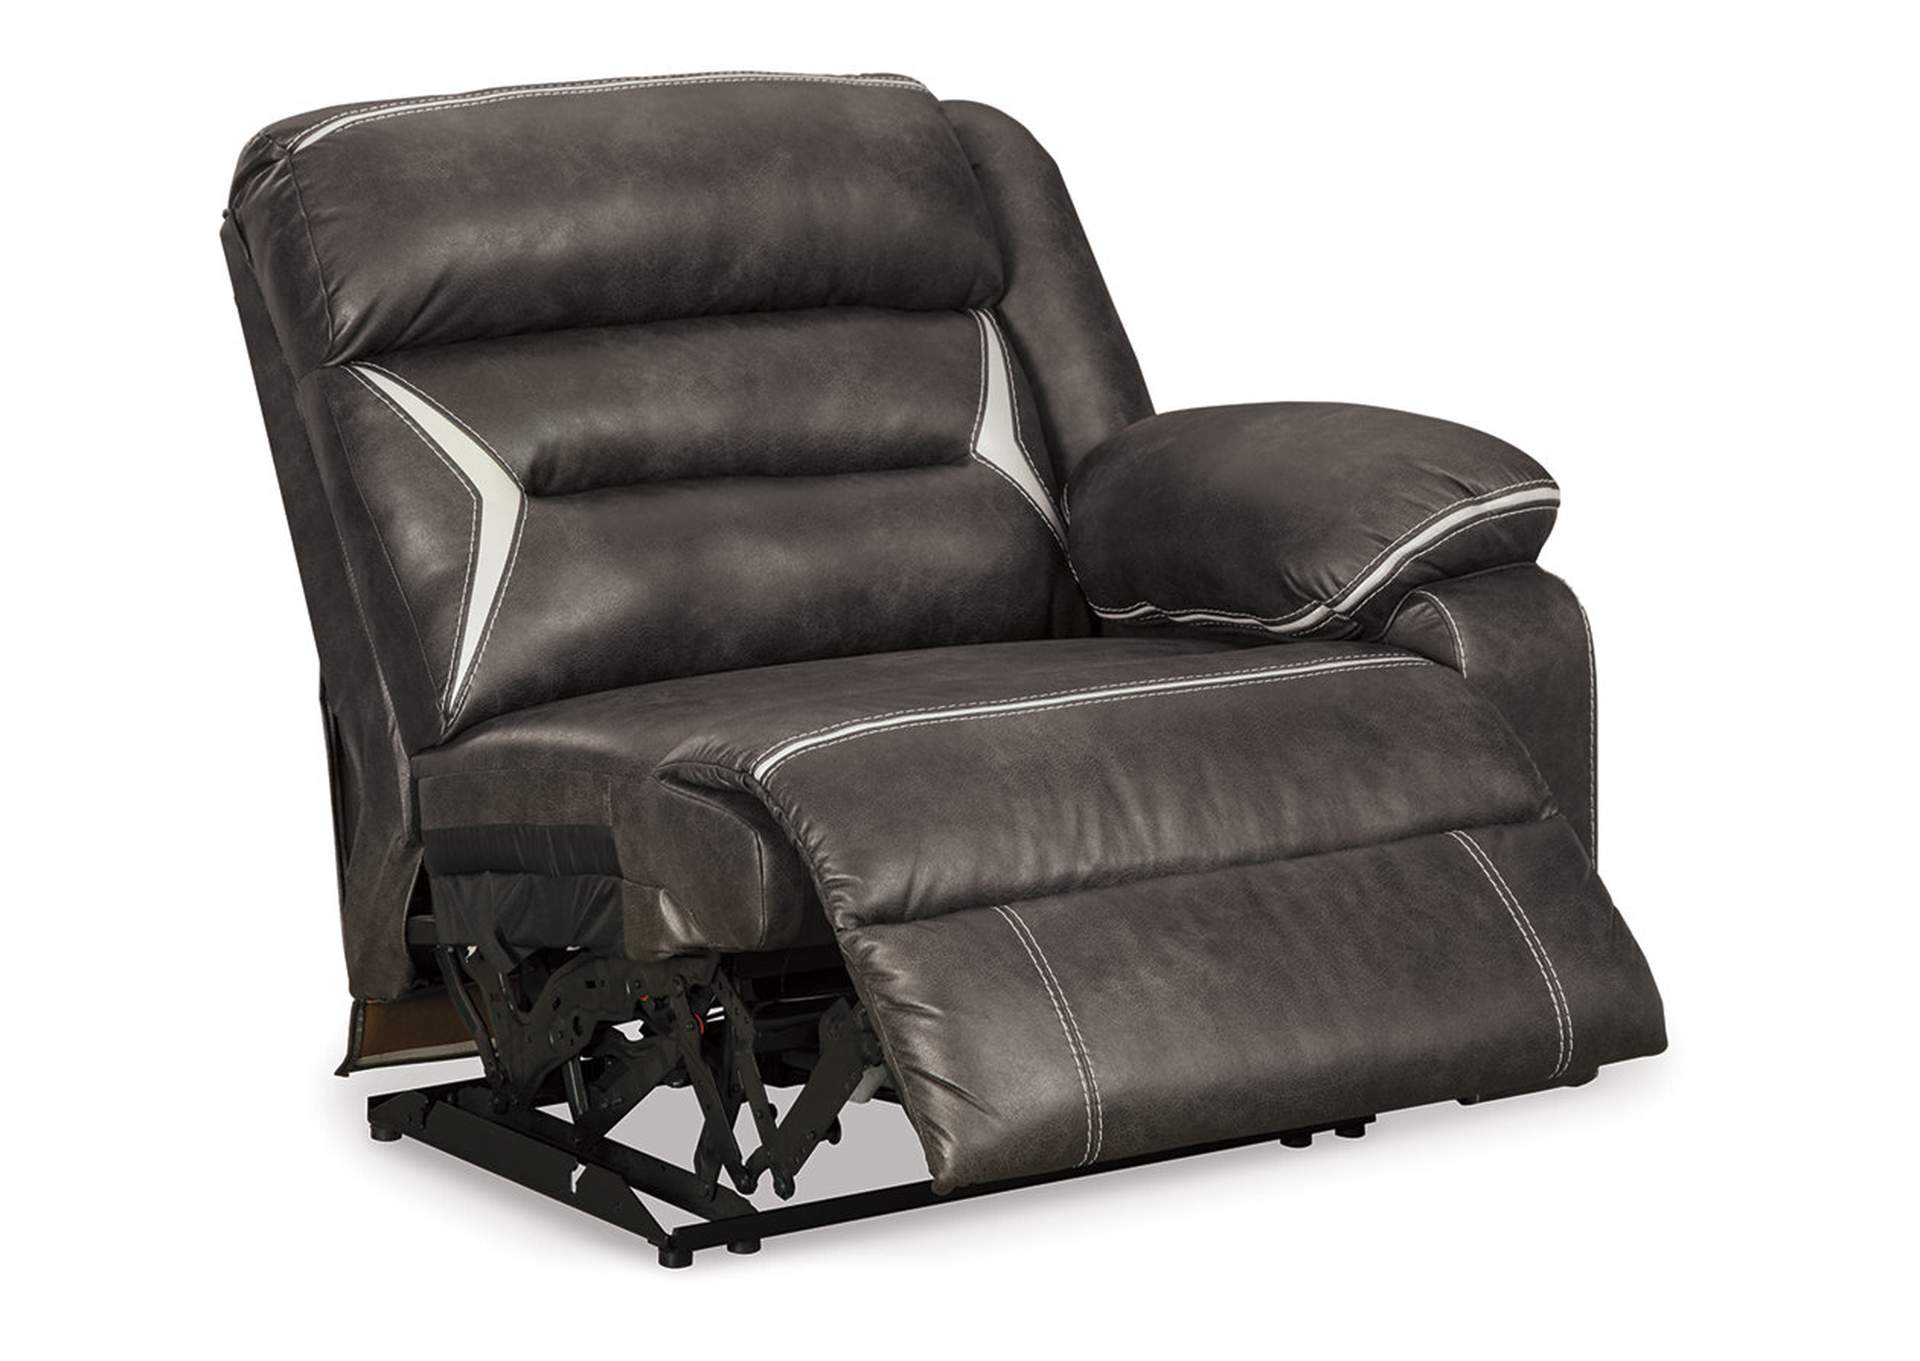 Kincord Right-Arm Facing Power Recliner,Signature Design By Ashley